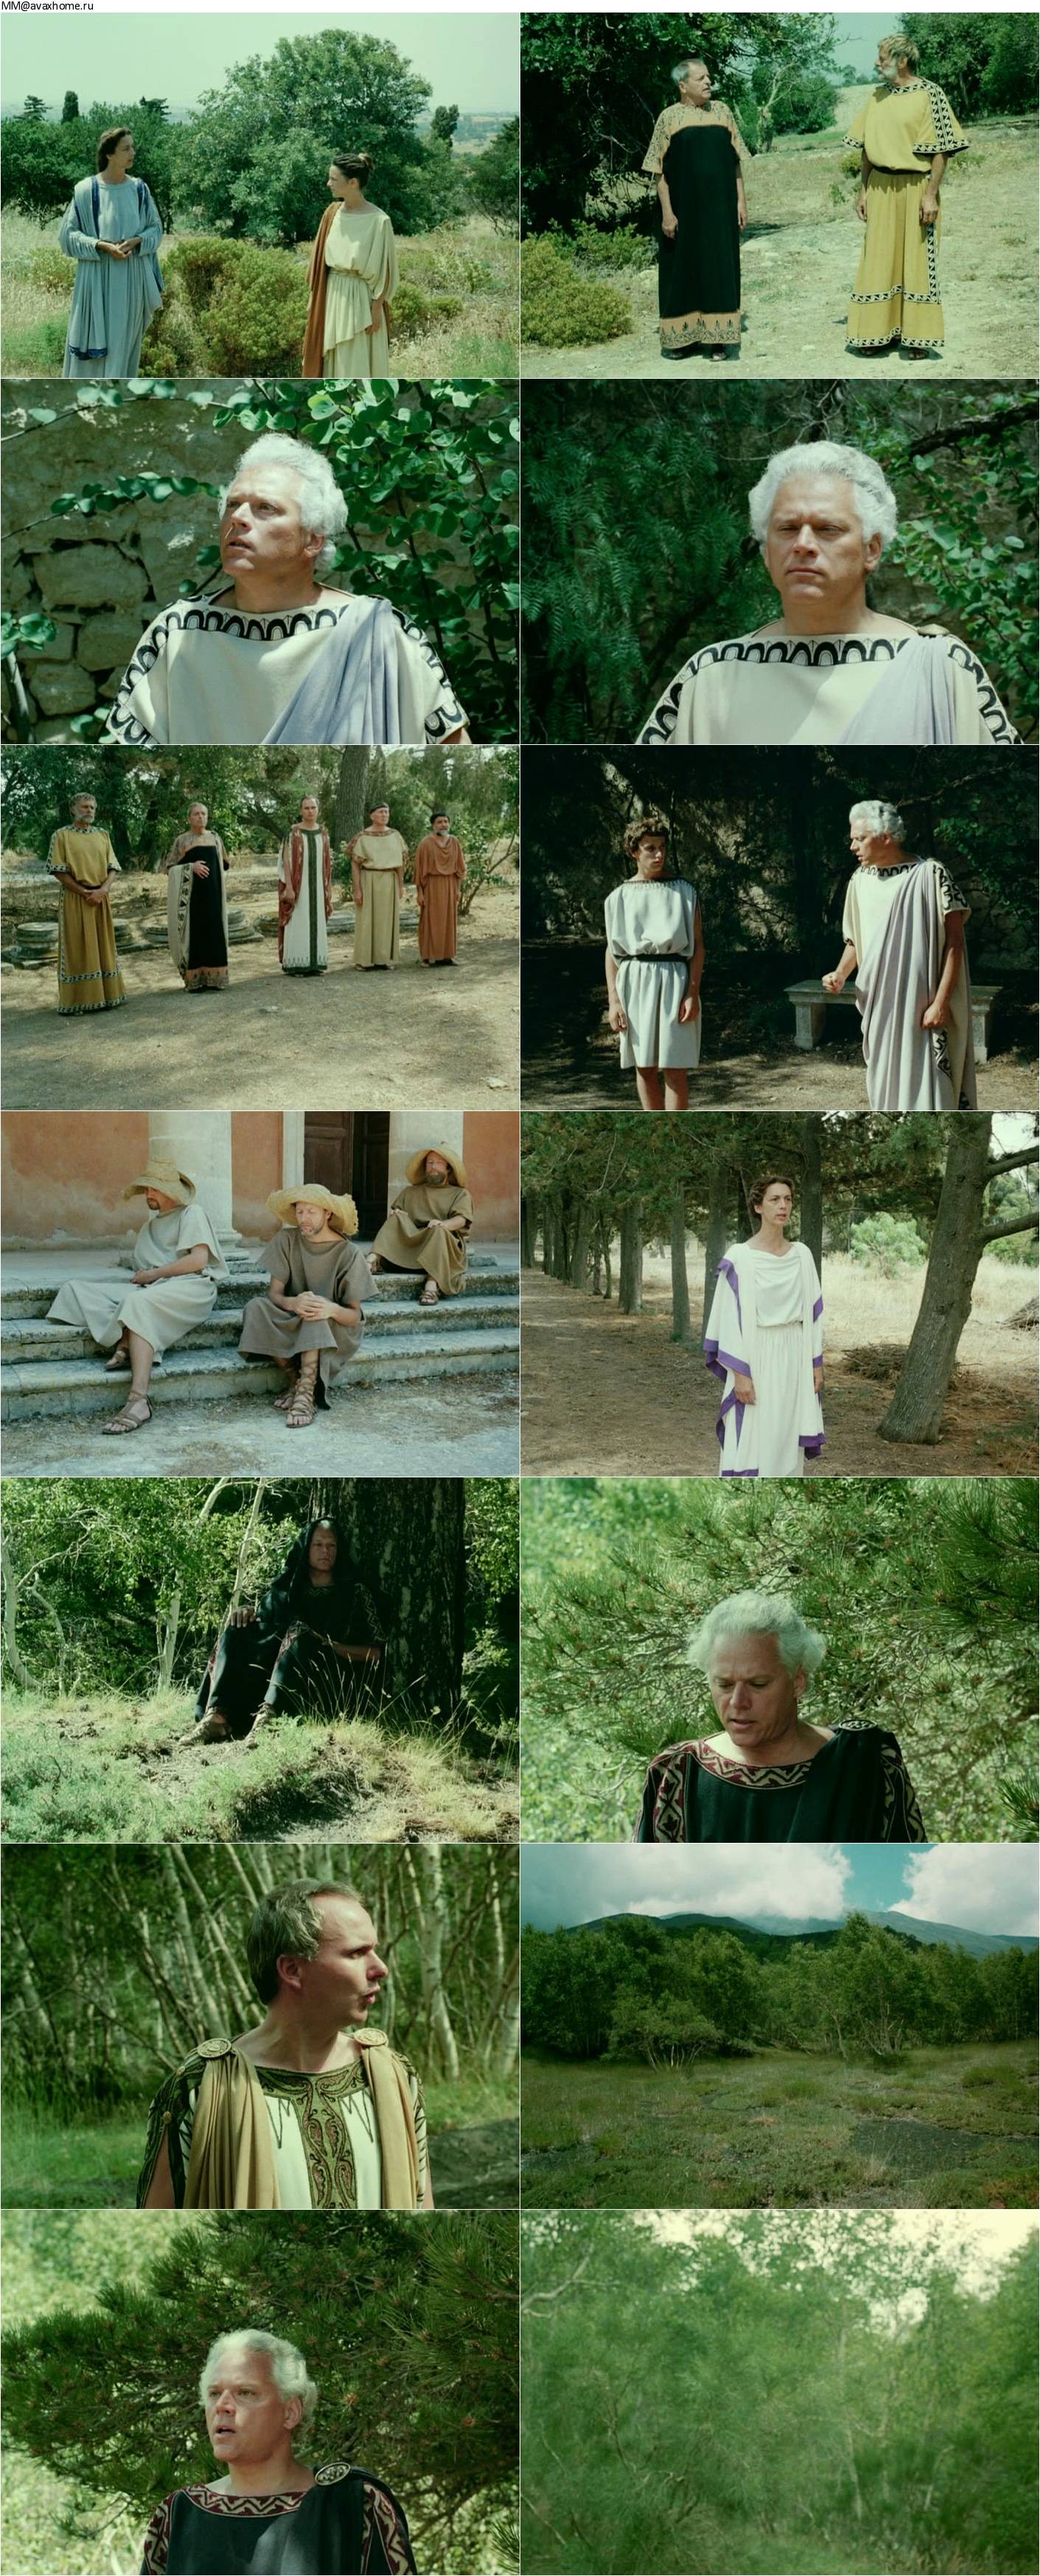 The Death of Empedocles (1987) Der Tod des Empedokles